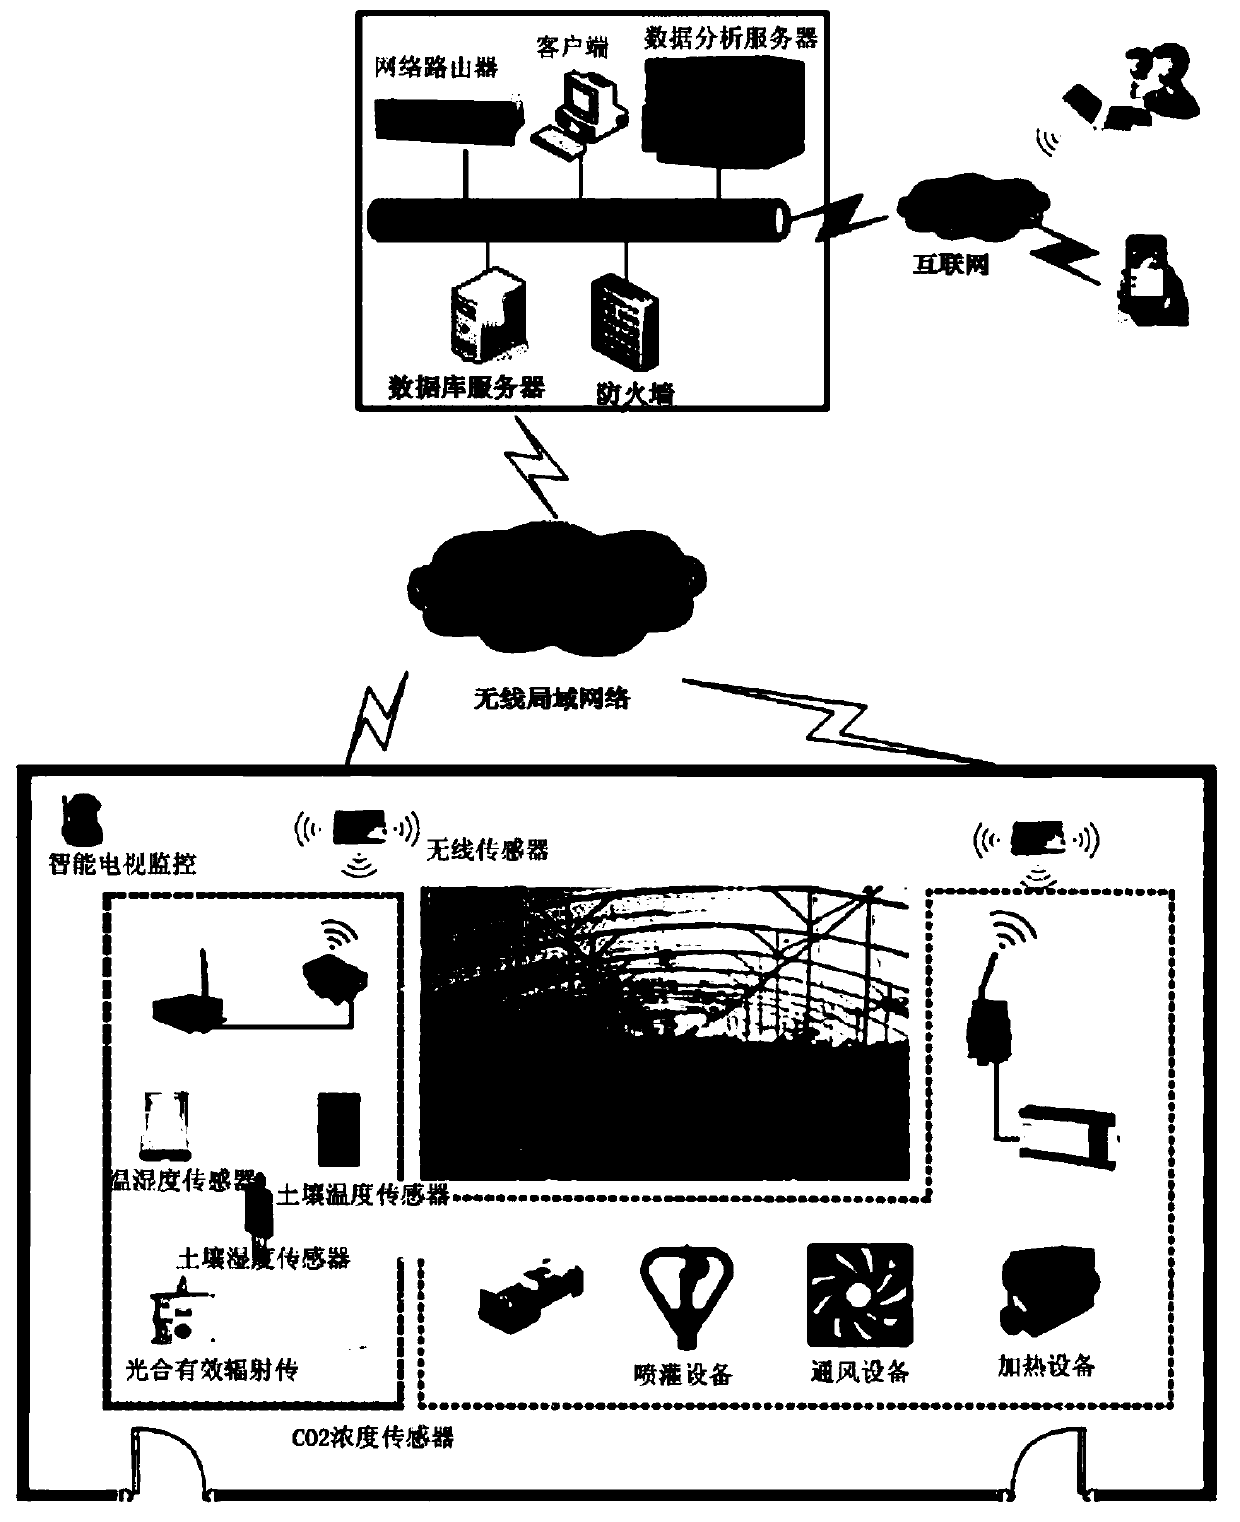 Intelligent agricultural information processing system based on Internet of Things